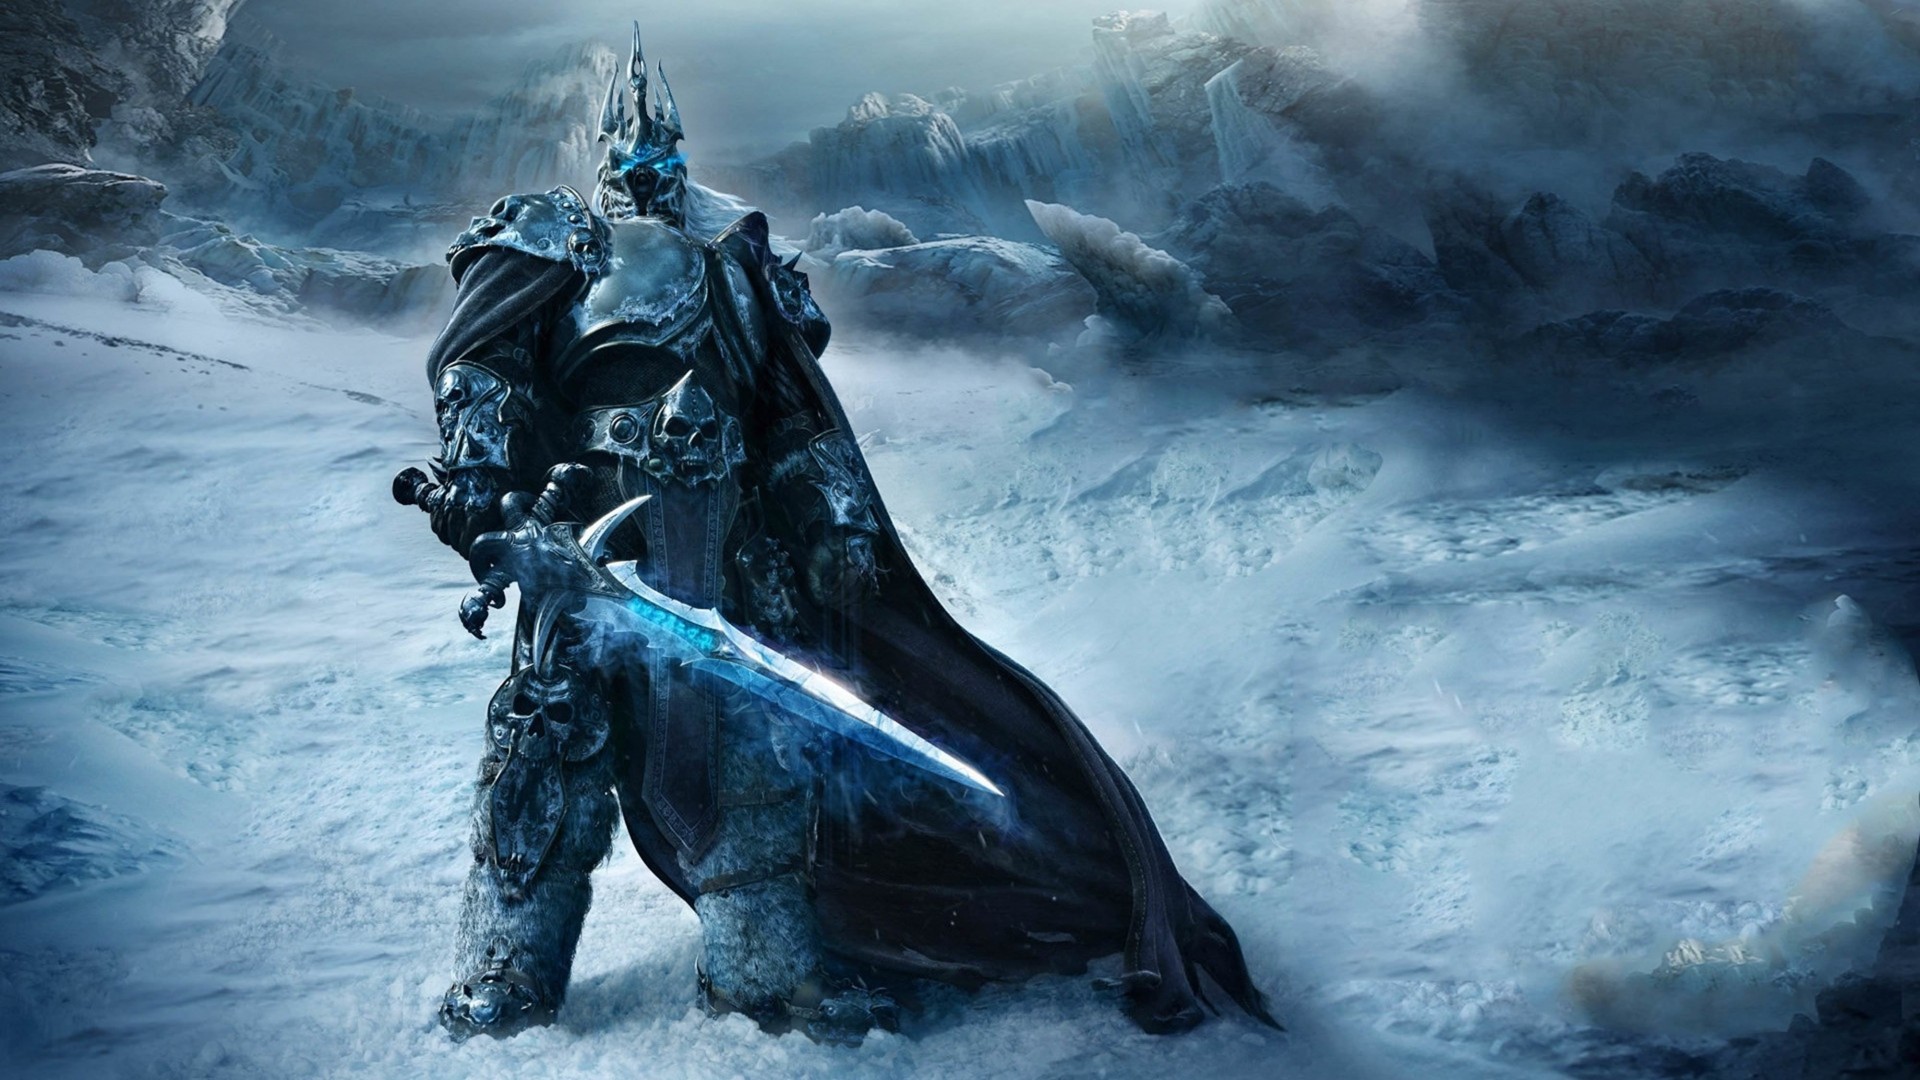 World of Warcraft: Wrath of the Lich King Wallpaper for Desktop 1920x1080